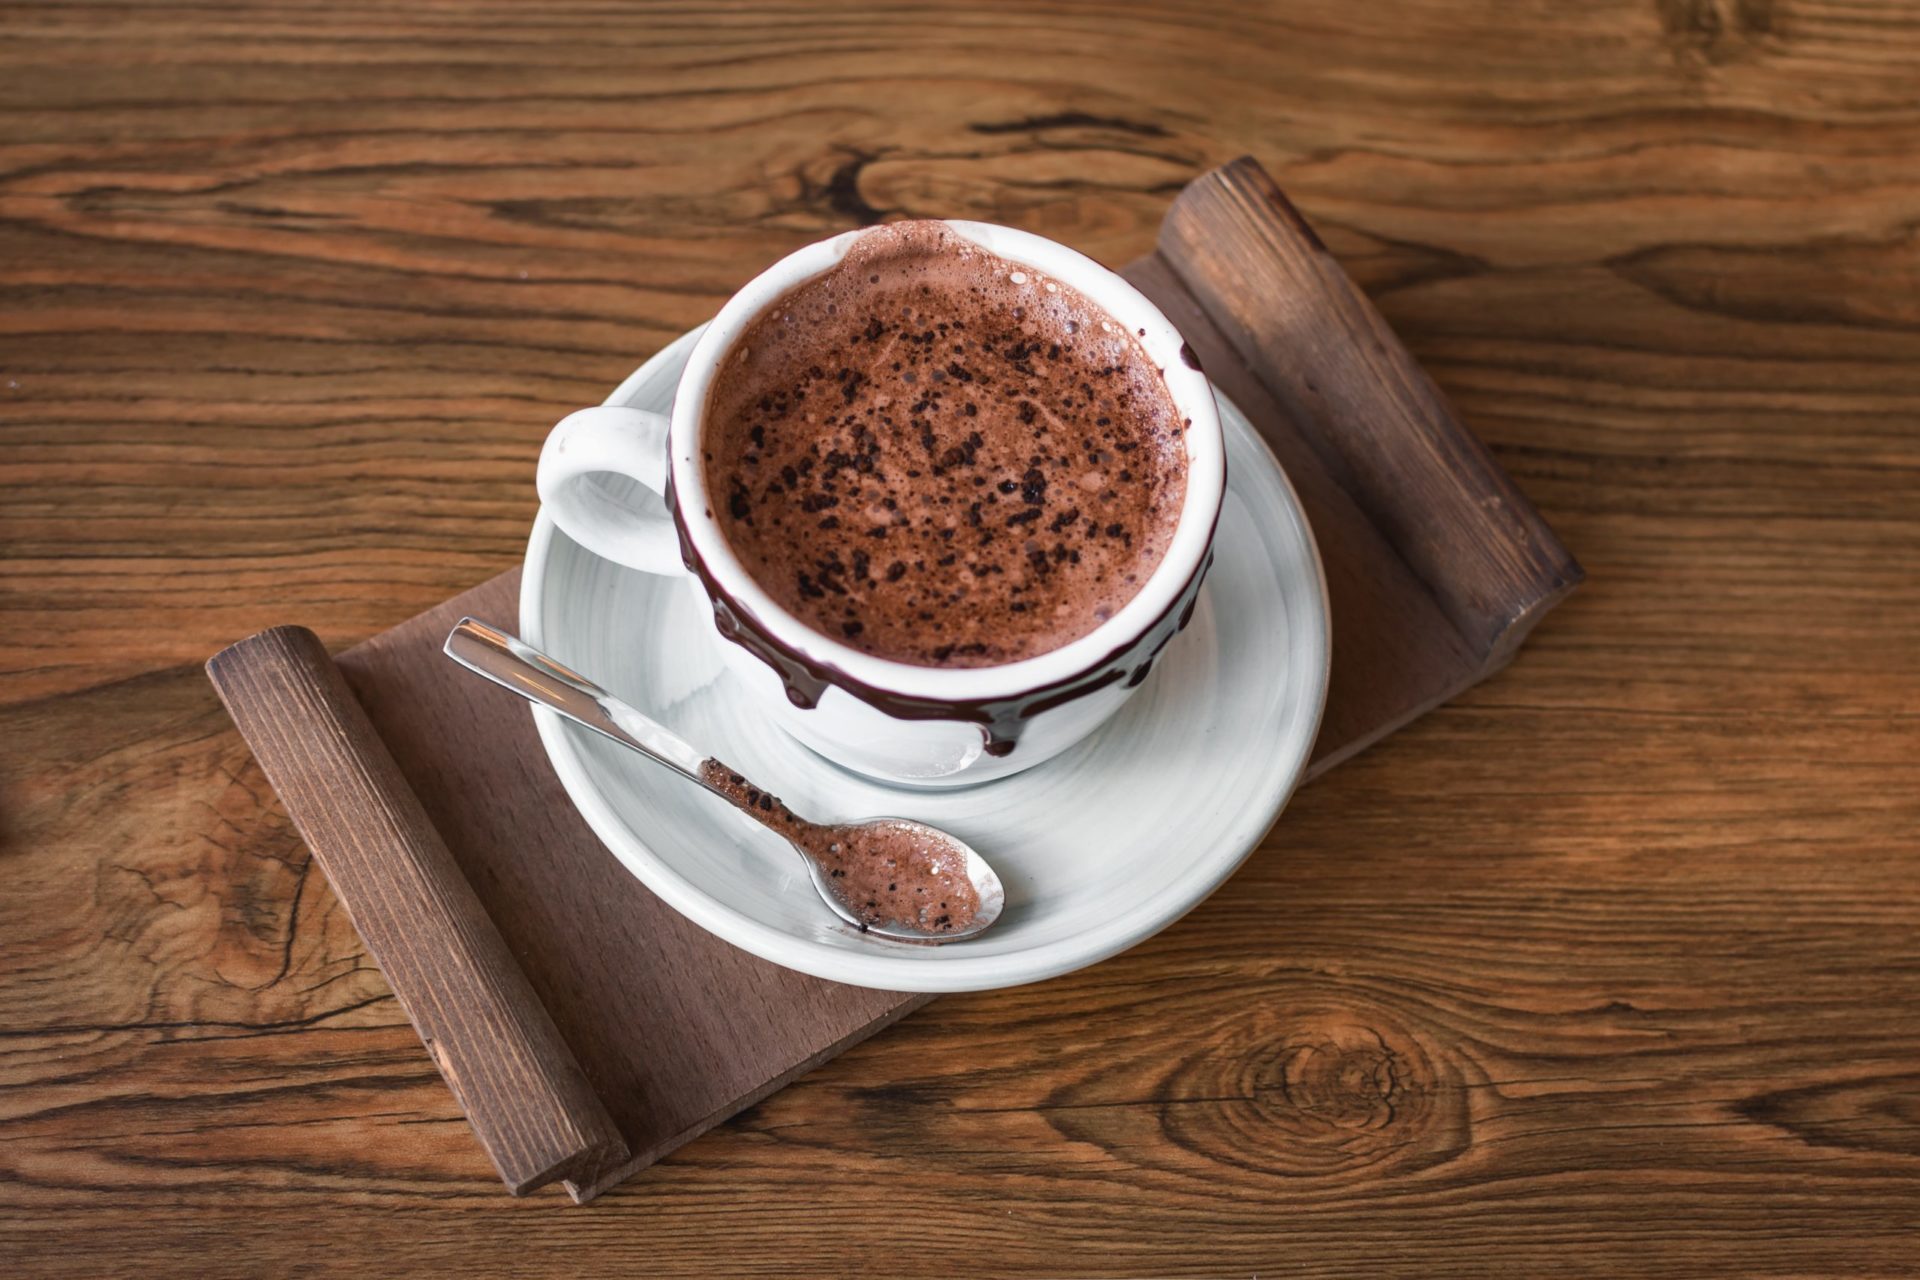 A cup of hot chocolate in a white mug rimmed with chocolate sits atop a white plate, wooden serving tray, and wooden table. There is a chocolate covered spoon on the plate.